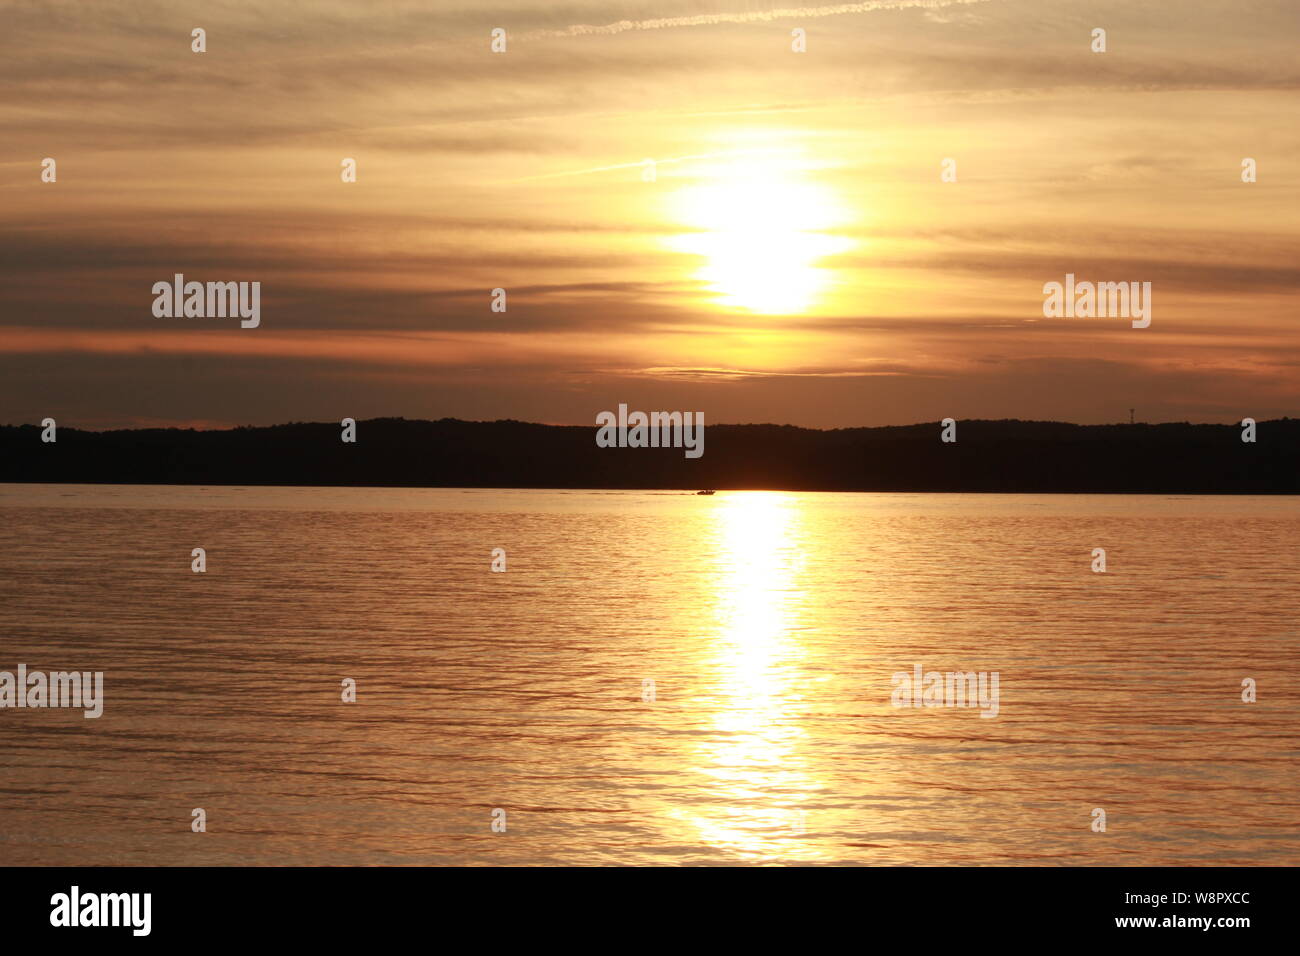 Sequence of sunset over the lake from same vantage point Stock Photo